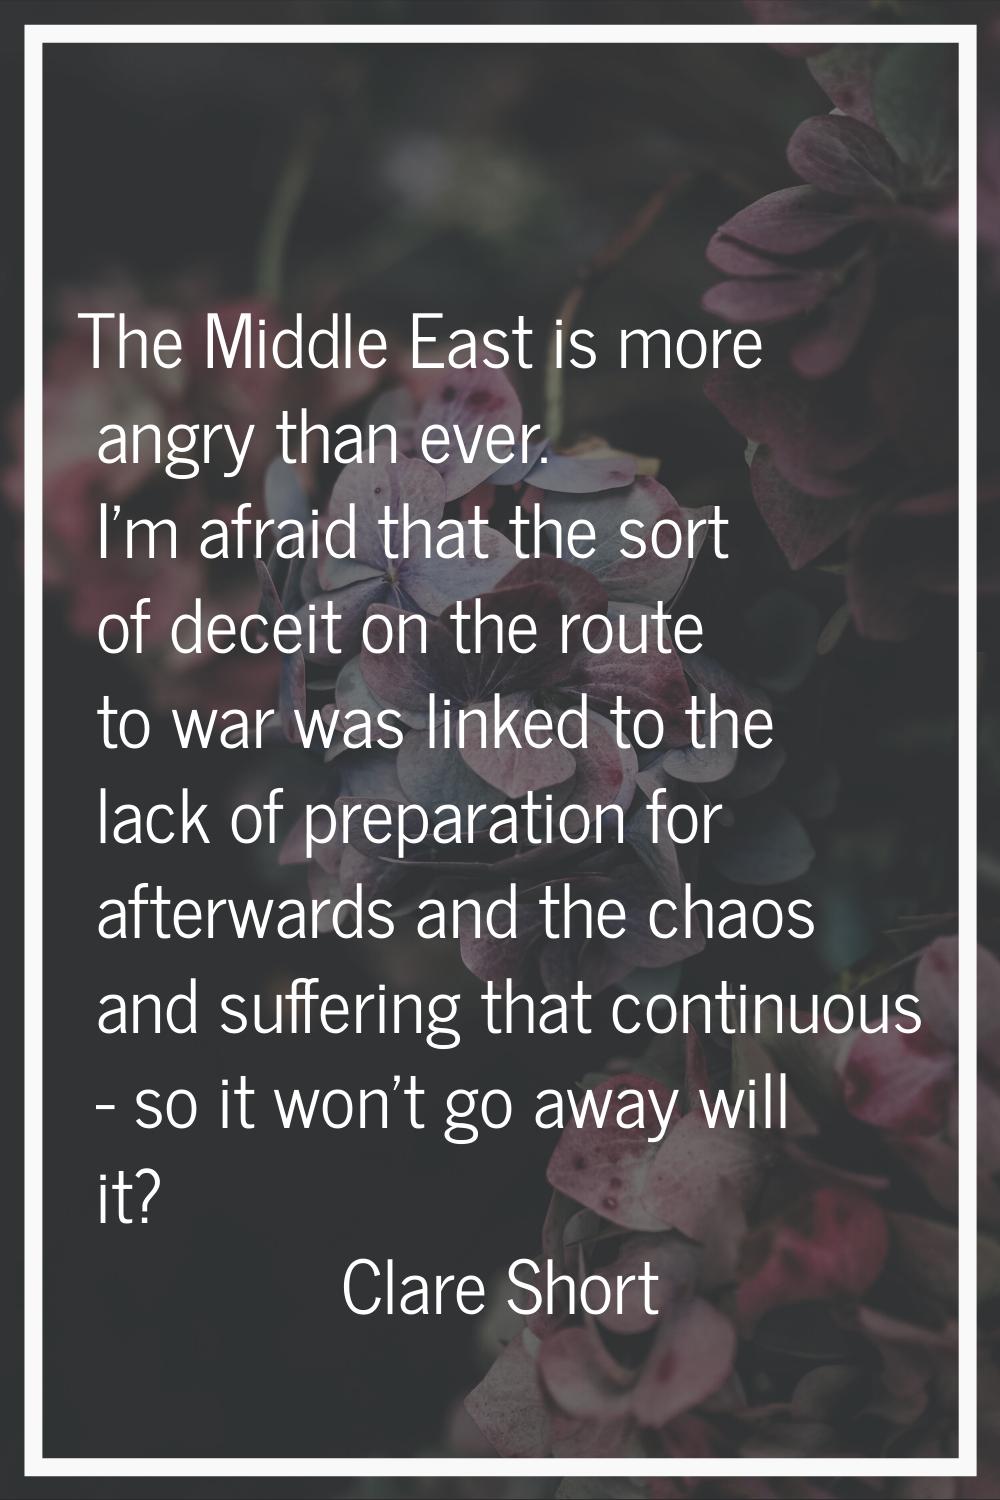 The Middle East is more angry than ever. I'm afraid that the sort of deceit on the route to war was